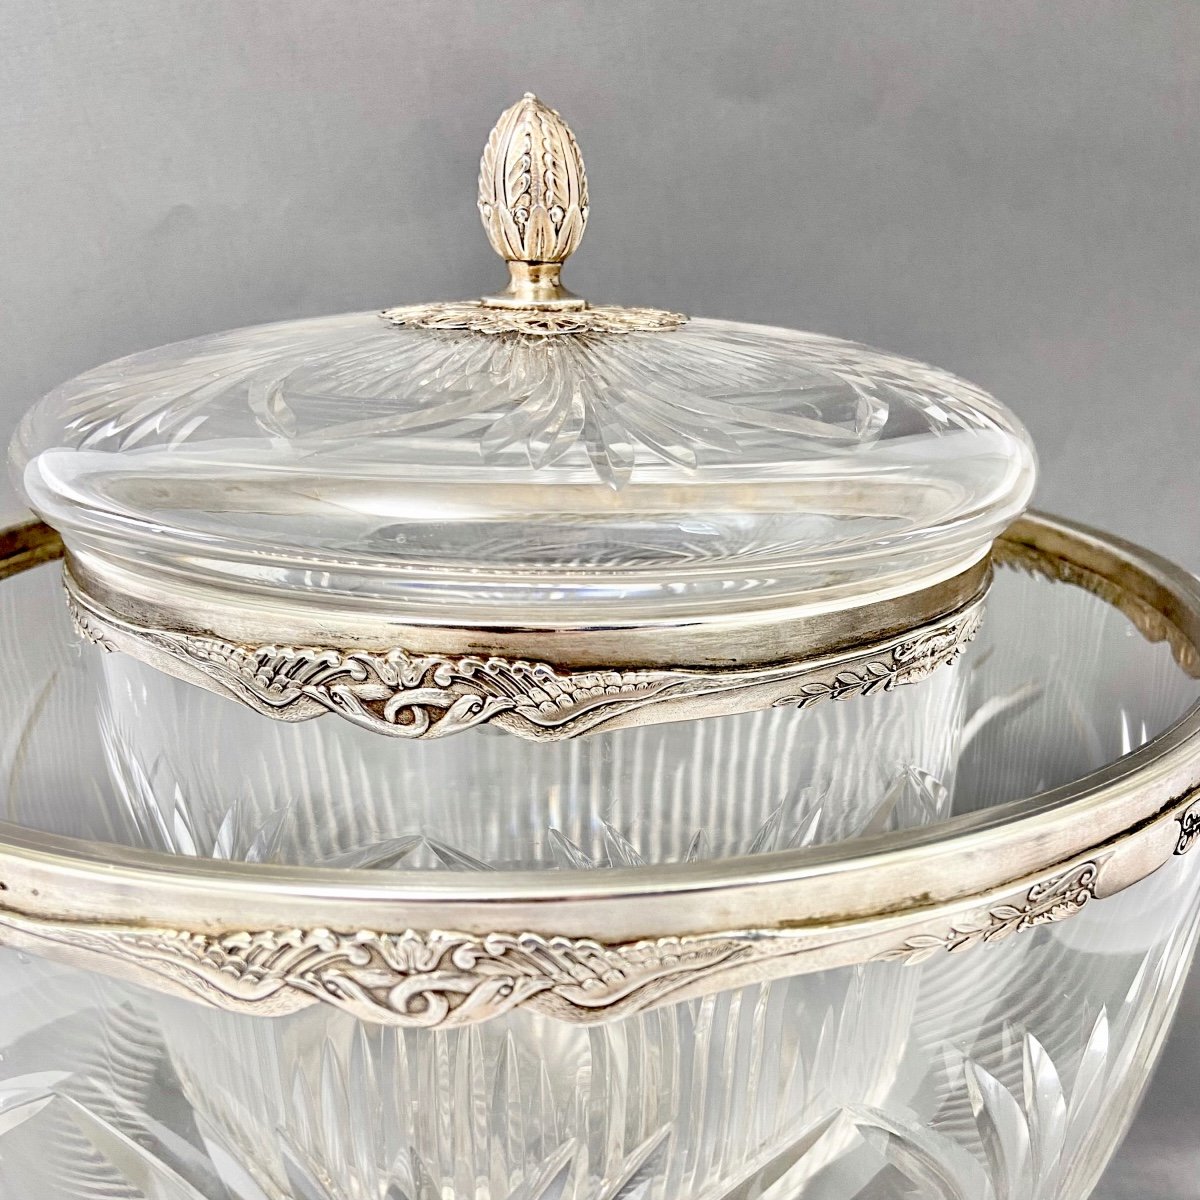 Ice Cream Service, Sterling Silver And Crystal, France Circa 1880-1900, Caviar Service